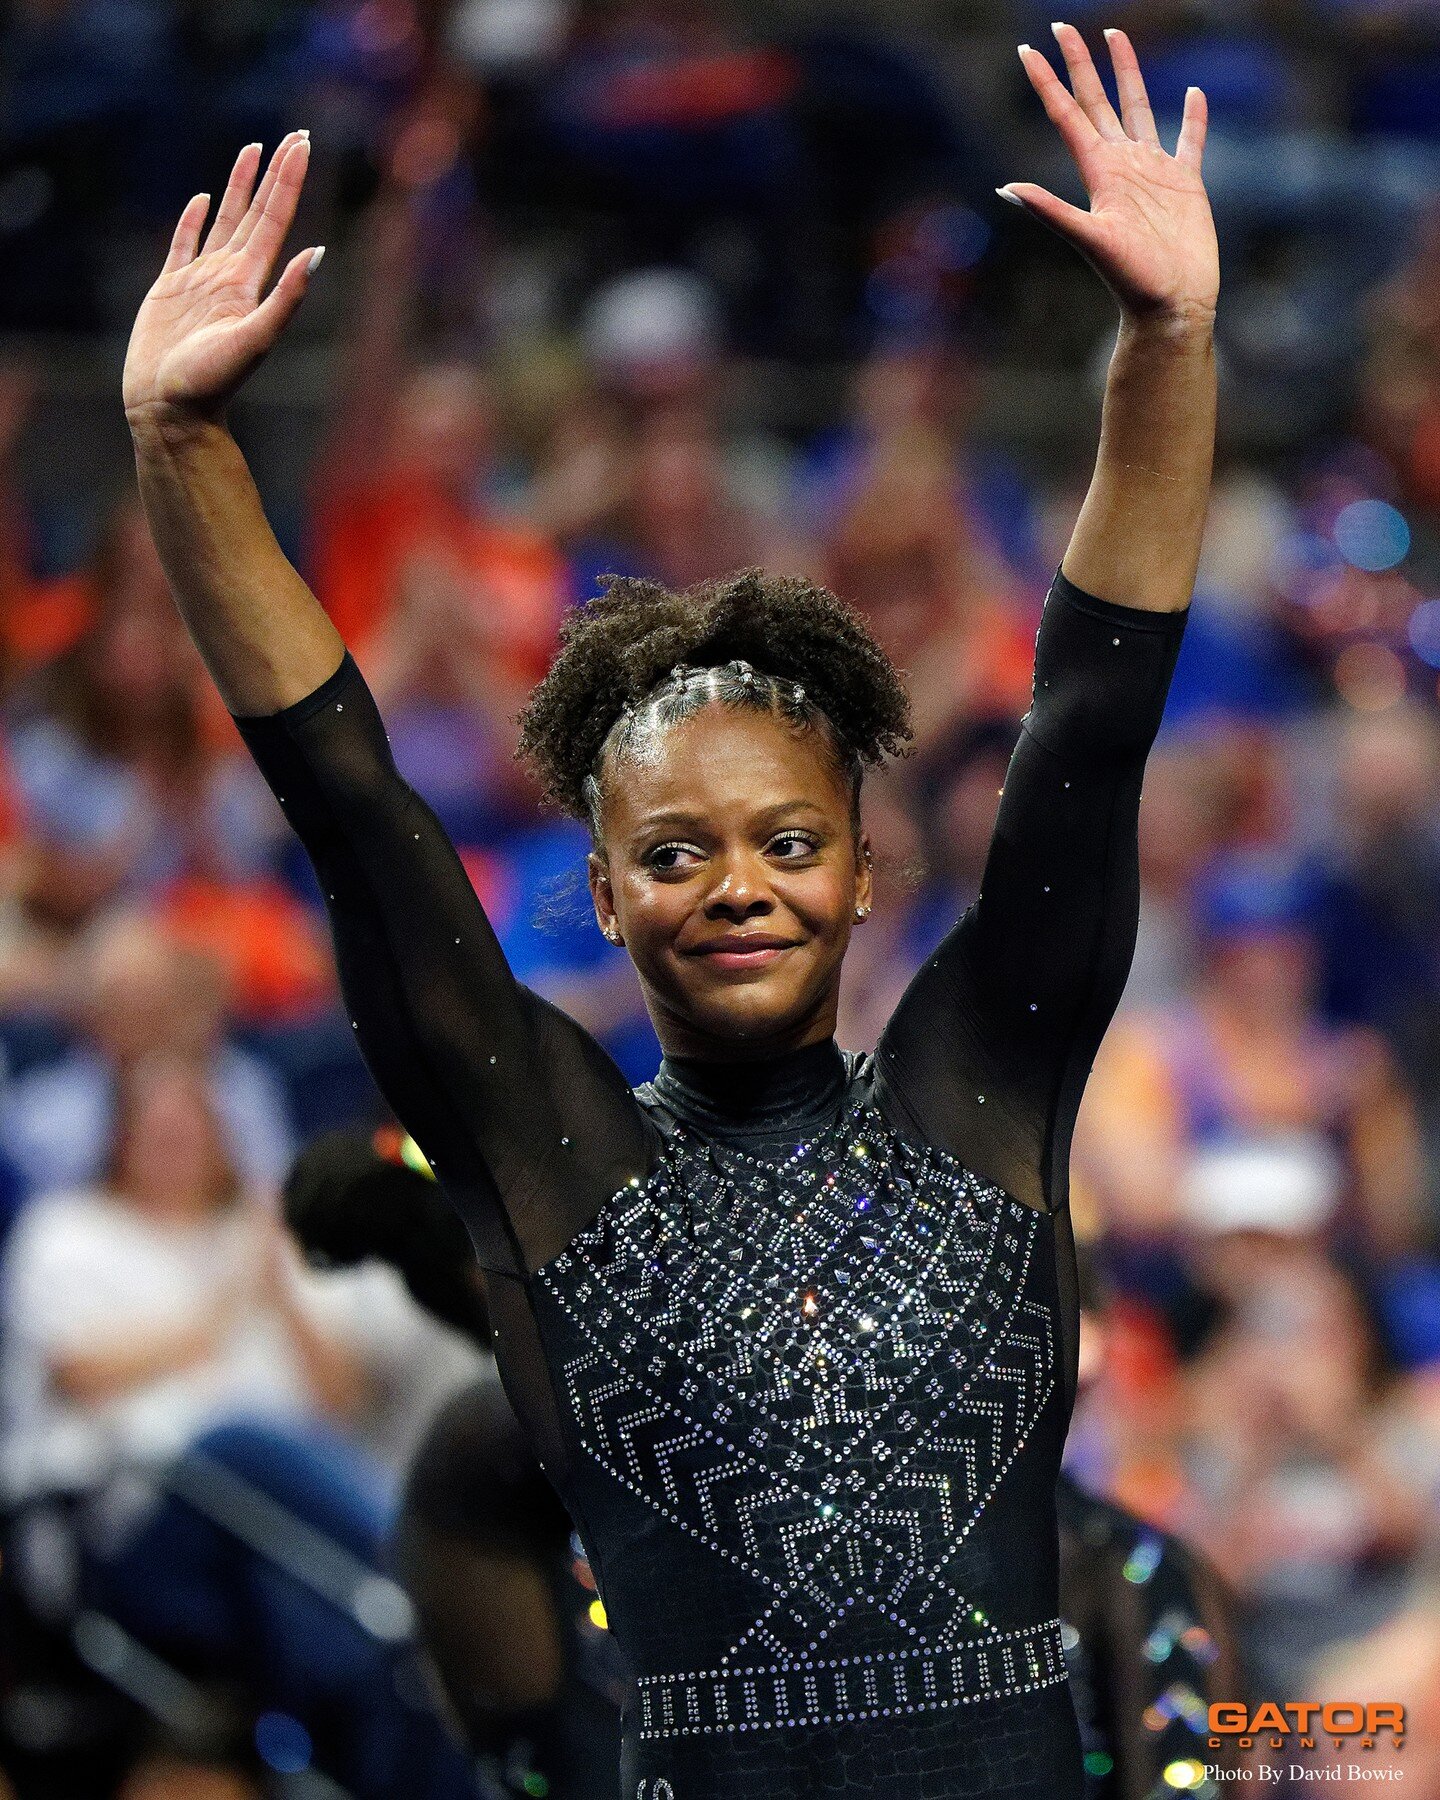 @gatorsgym wins their 5th straight SEC title on senior night as they defeat the Kentucky Wildcats. #gators #gatornation #gatorsgymnastics #gatorsgym #seniornight #champions